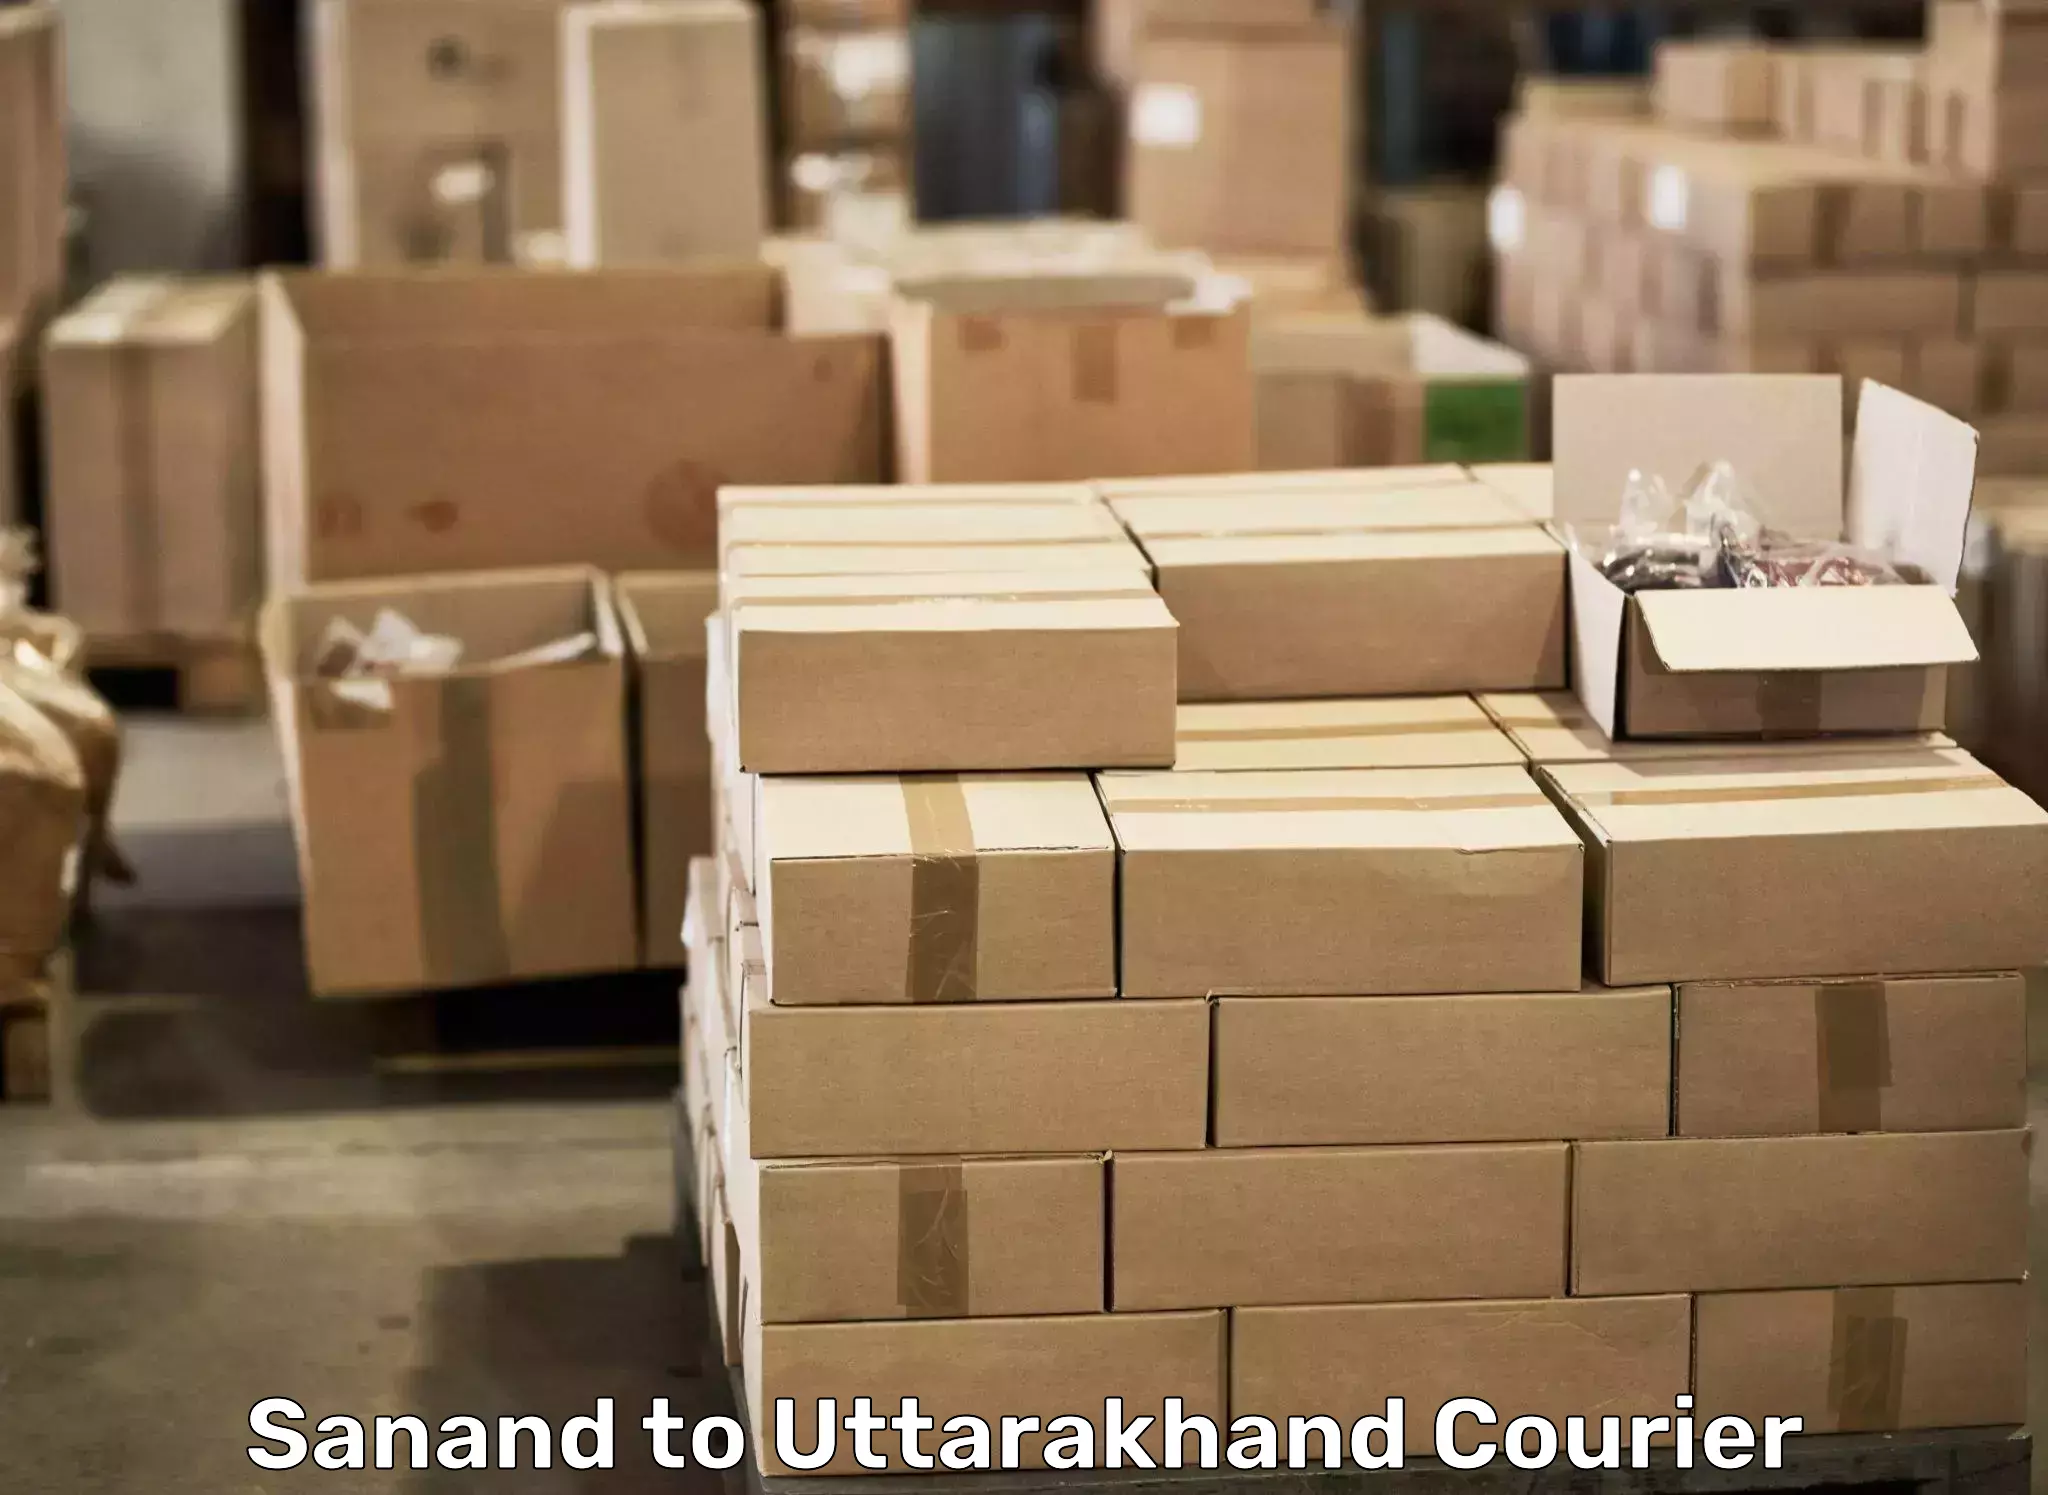 Full-service furniture transport Sanand to Roorkee